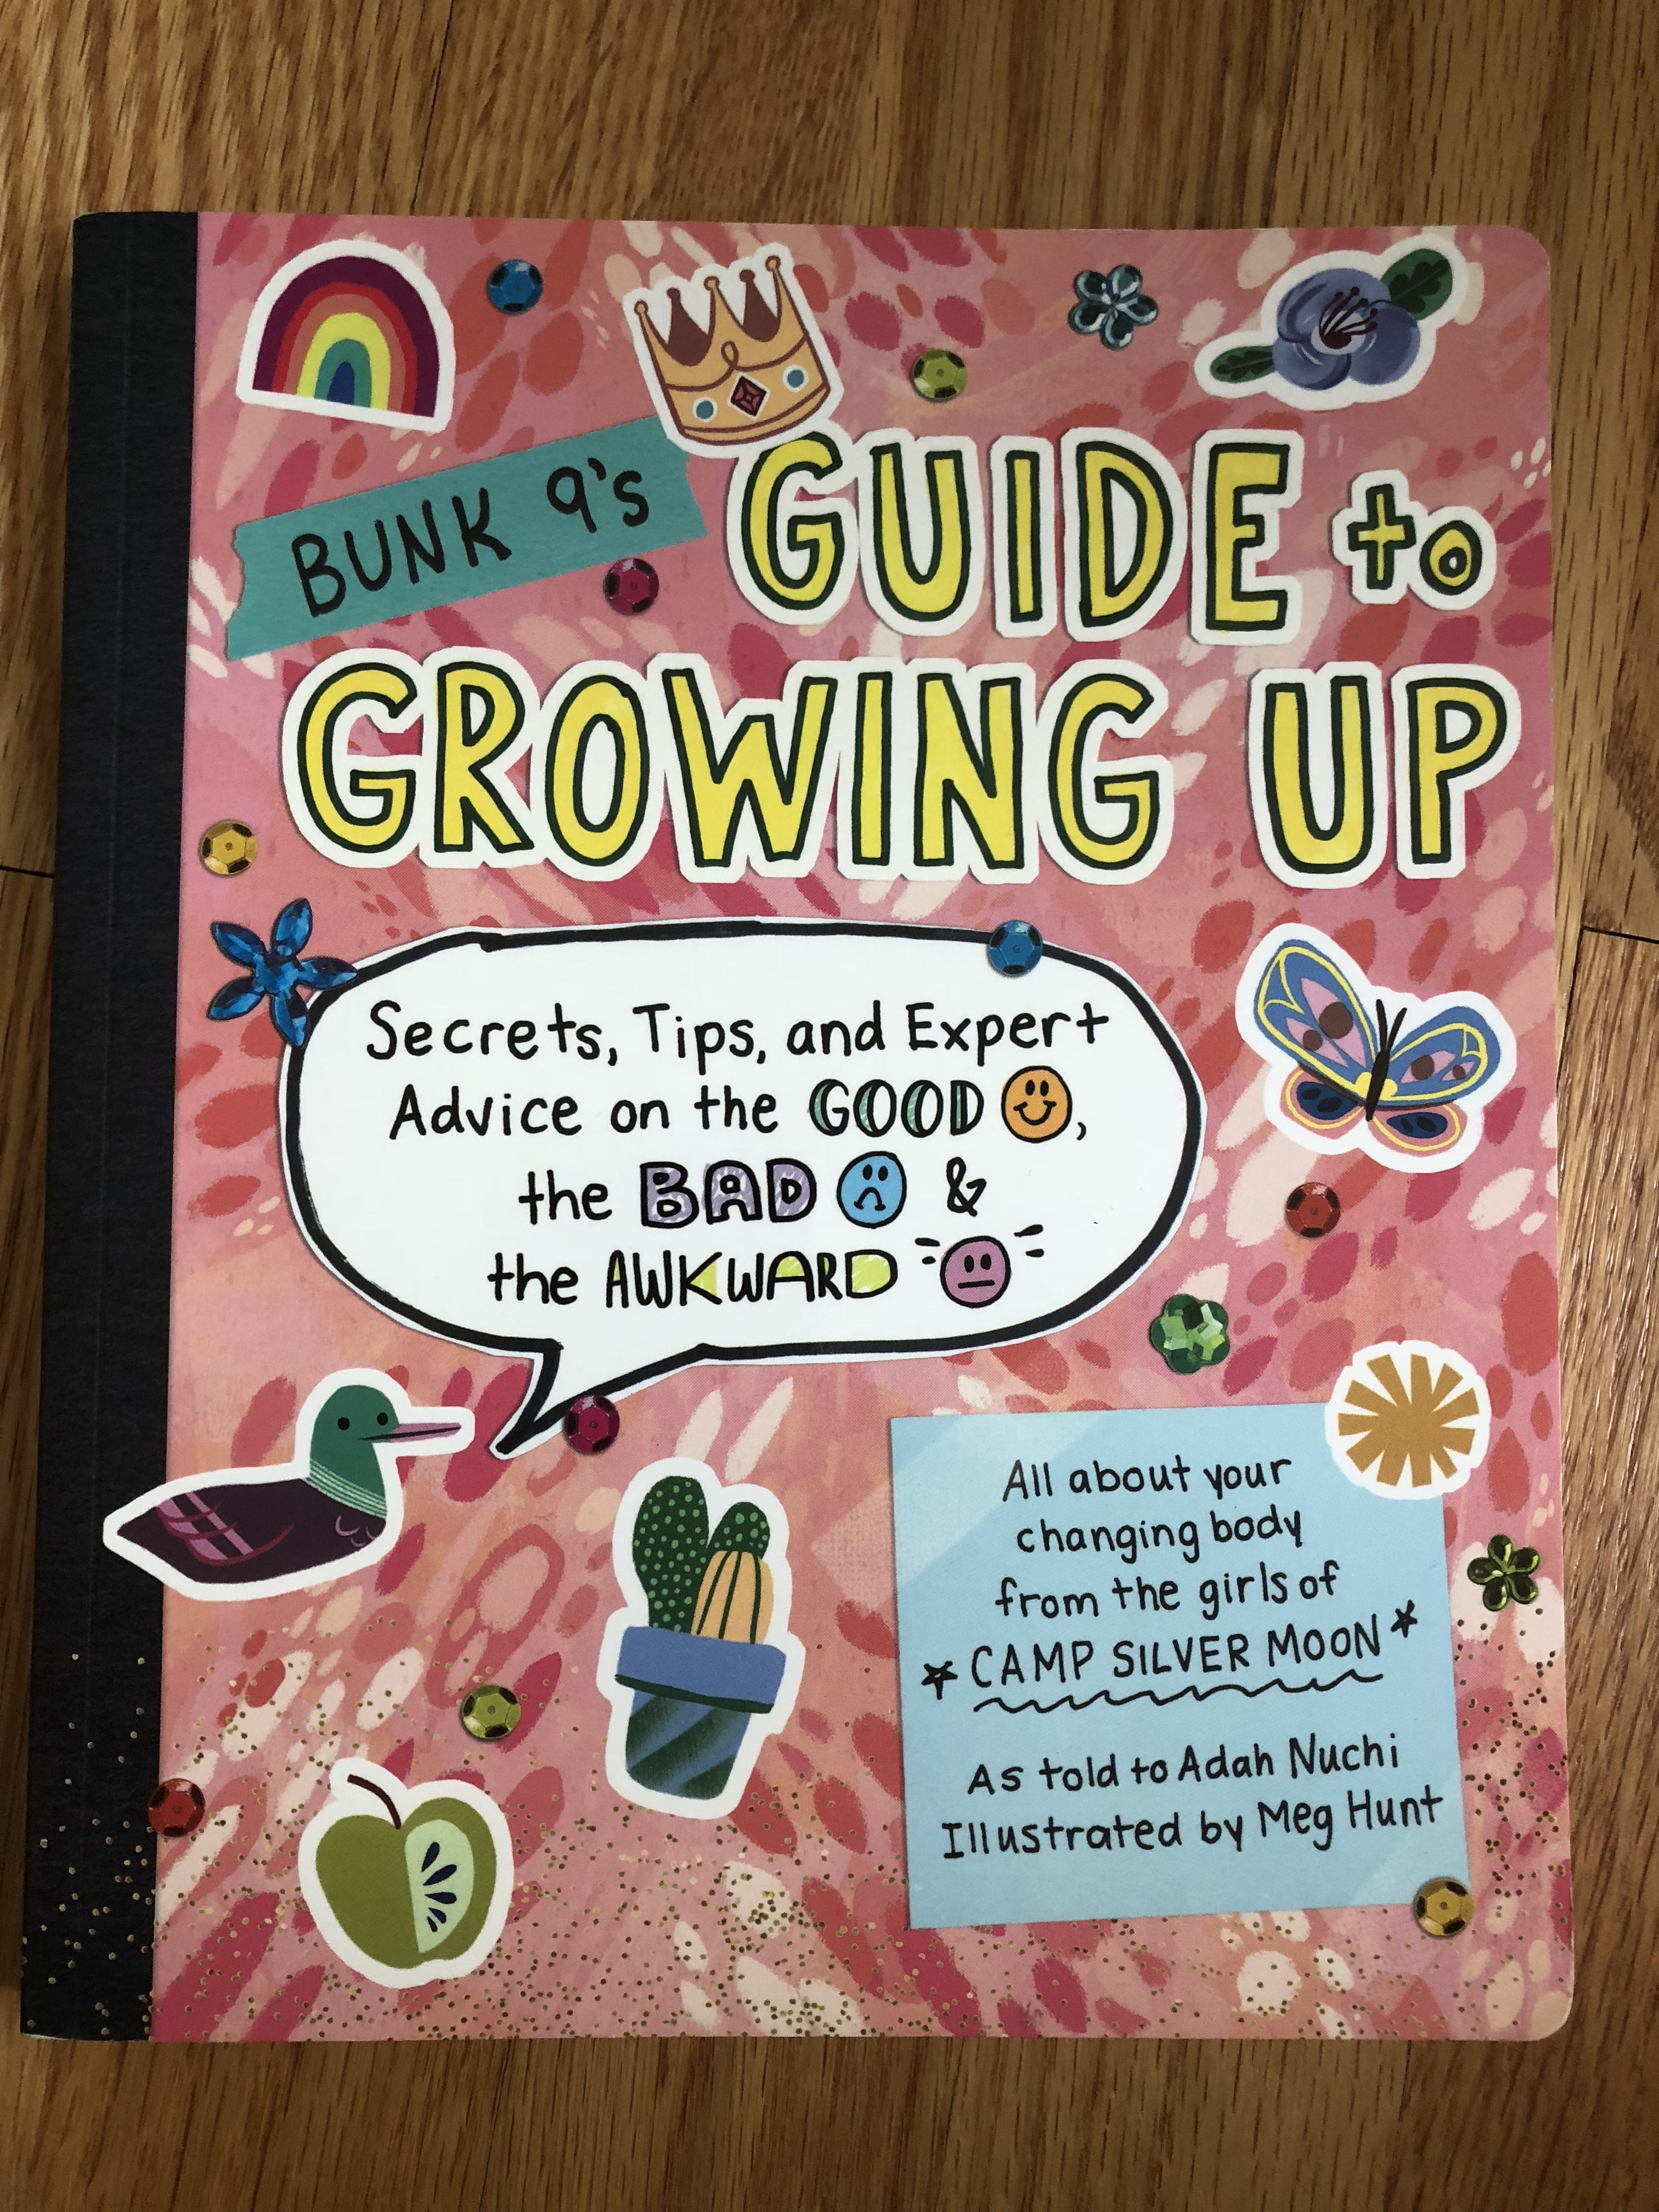 Bunk 9's Guide to Growing Up - Amazing Me